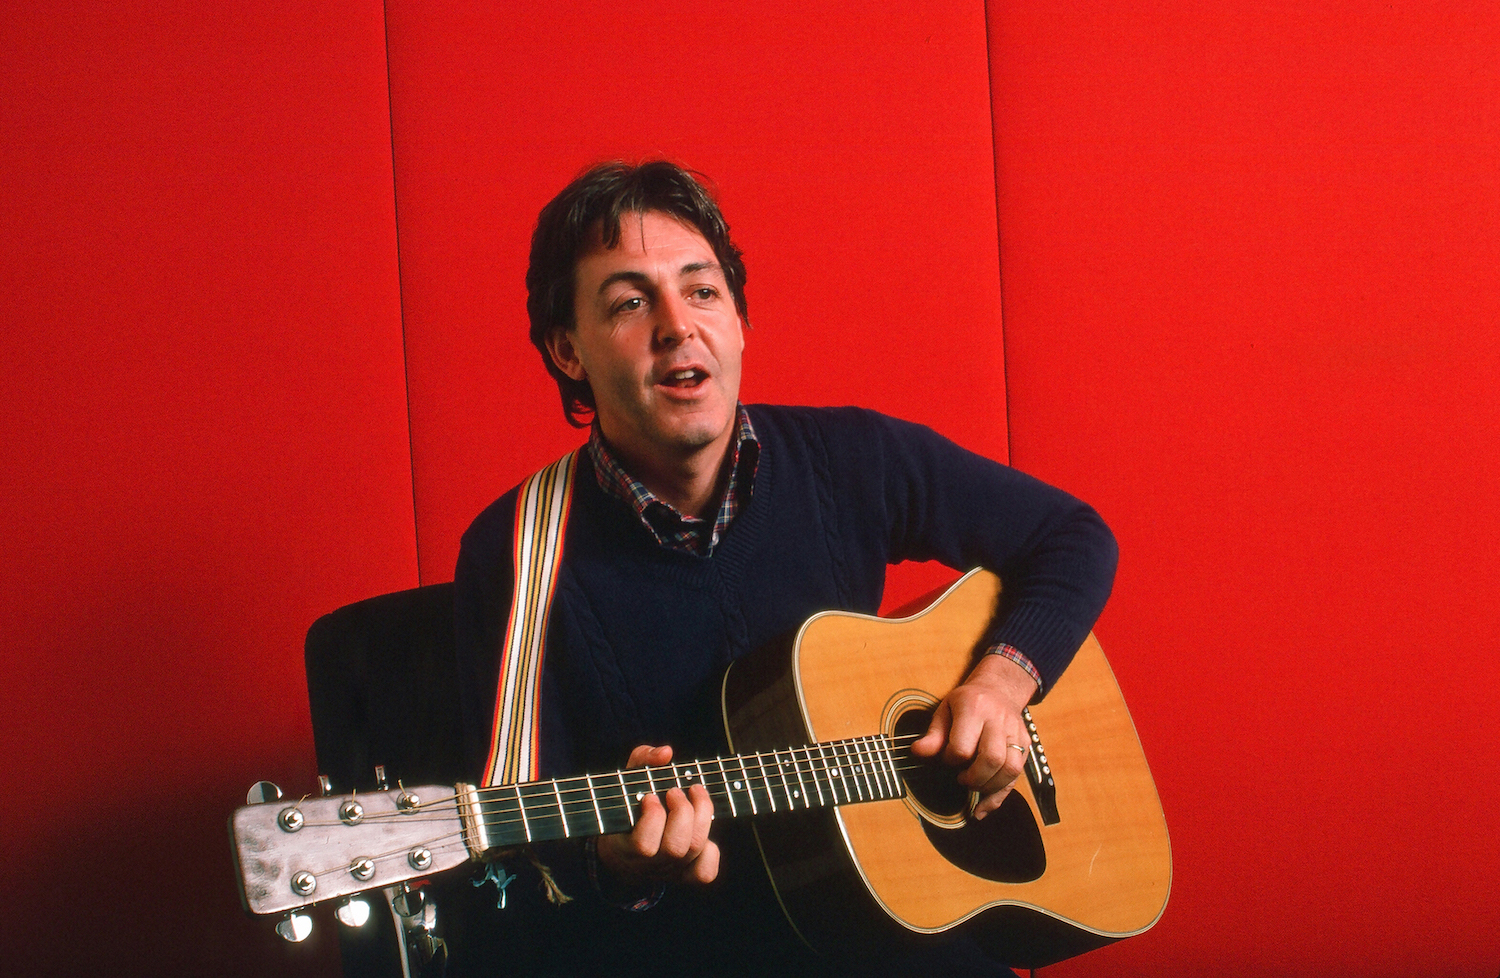 Portrait of British musician Paul McCartney as he plays acoustic guitar against a red background